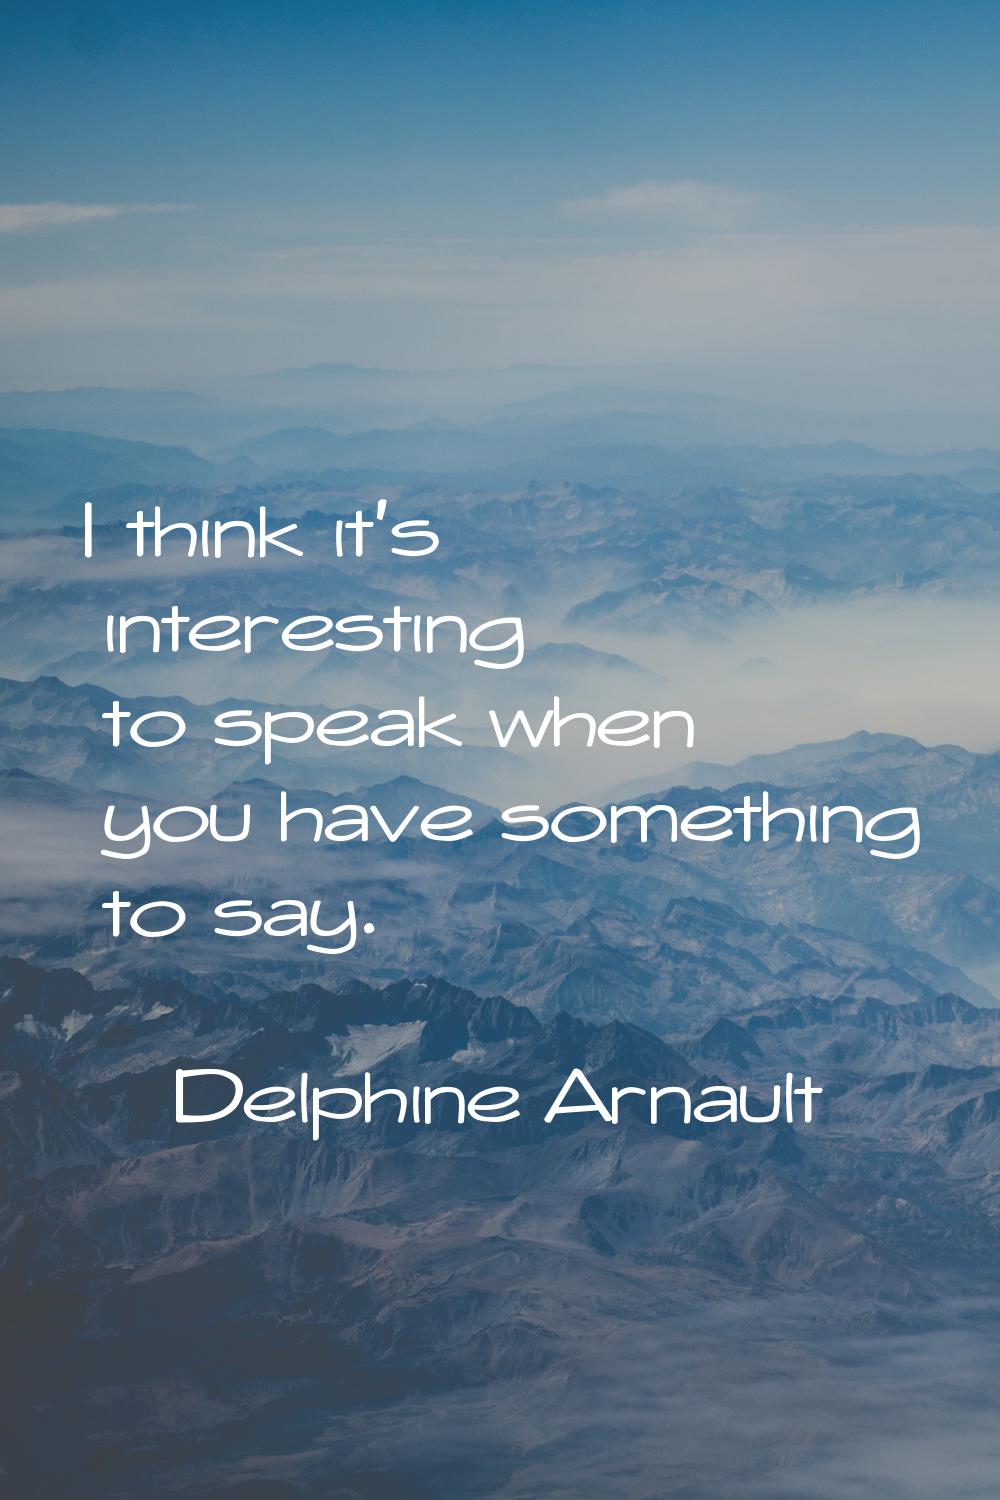 I think it's interesting to speak when you have something to say.